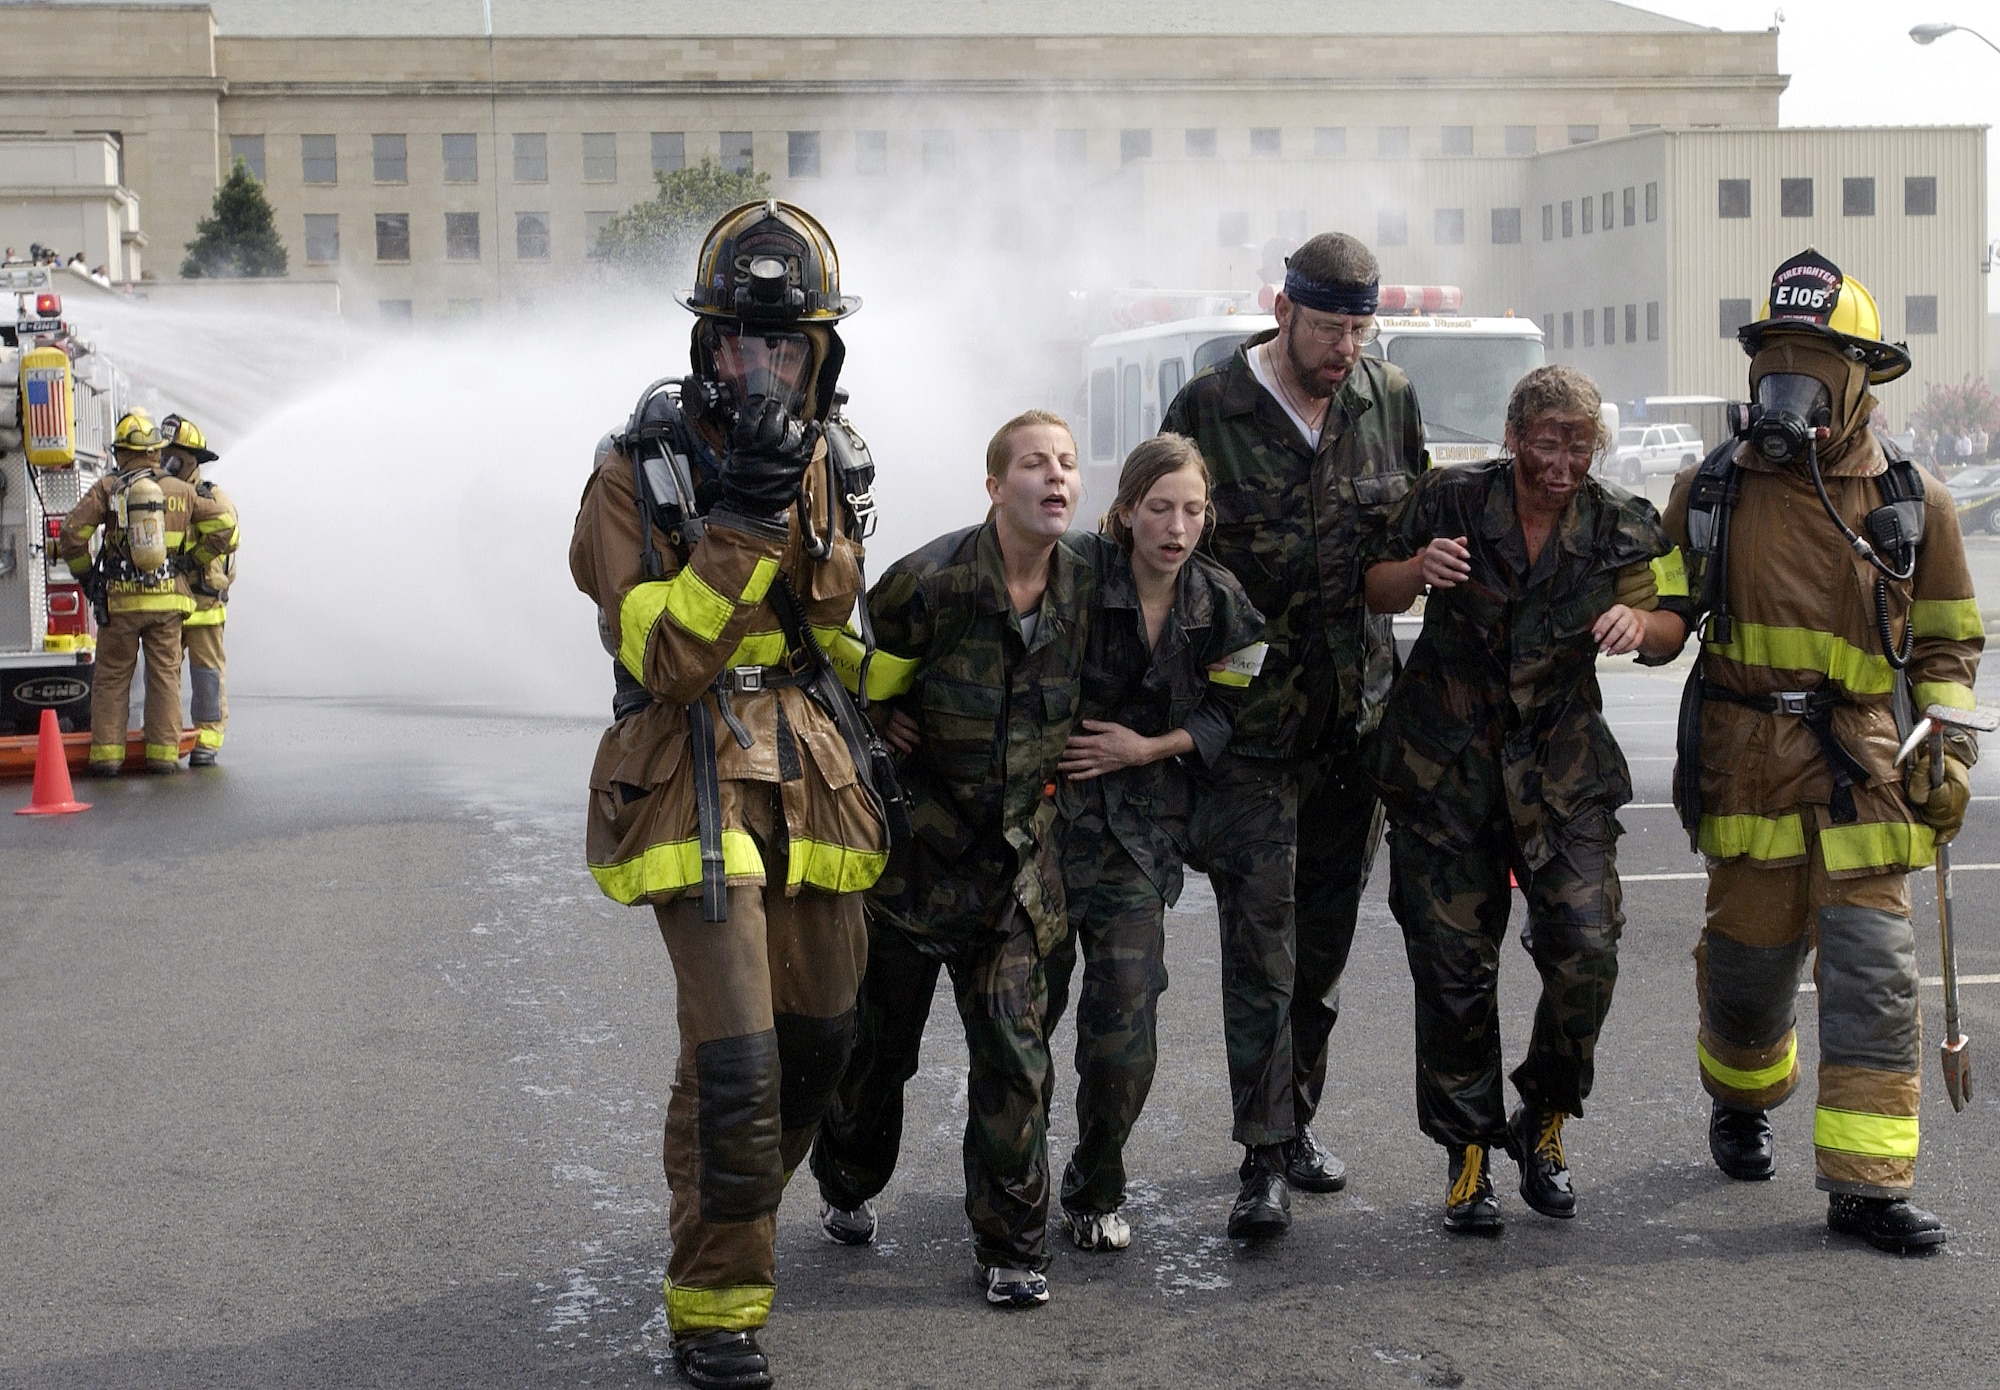 WASHINGTON -- Firefighters from Arlington County, Va., escort volunteer victims toward a simulated decontamination area in the Pentagon's south parking lot during exercise Gallant Fox on July 24.  Gallant Fox is a large-scale chemical, biological, radiological and nuclear-training exercise conducted by the Pentagon Force Protection Agency.  The exercise provides training in responding to real-world mass casualty scenarios by various local emergency fire, police, medical and hazardous-material response units.  (U.S. Air Force photo by Master Sgt. Jim Varhegyi)